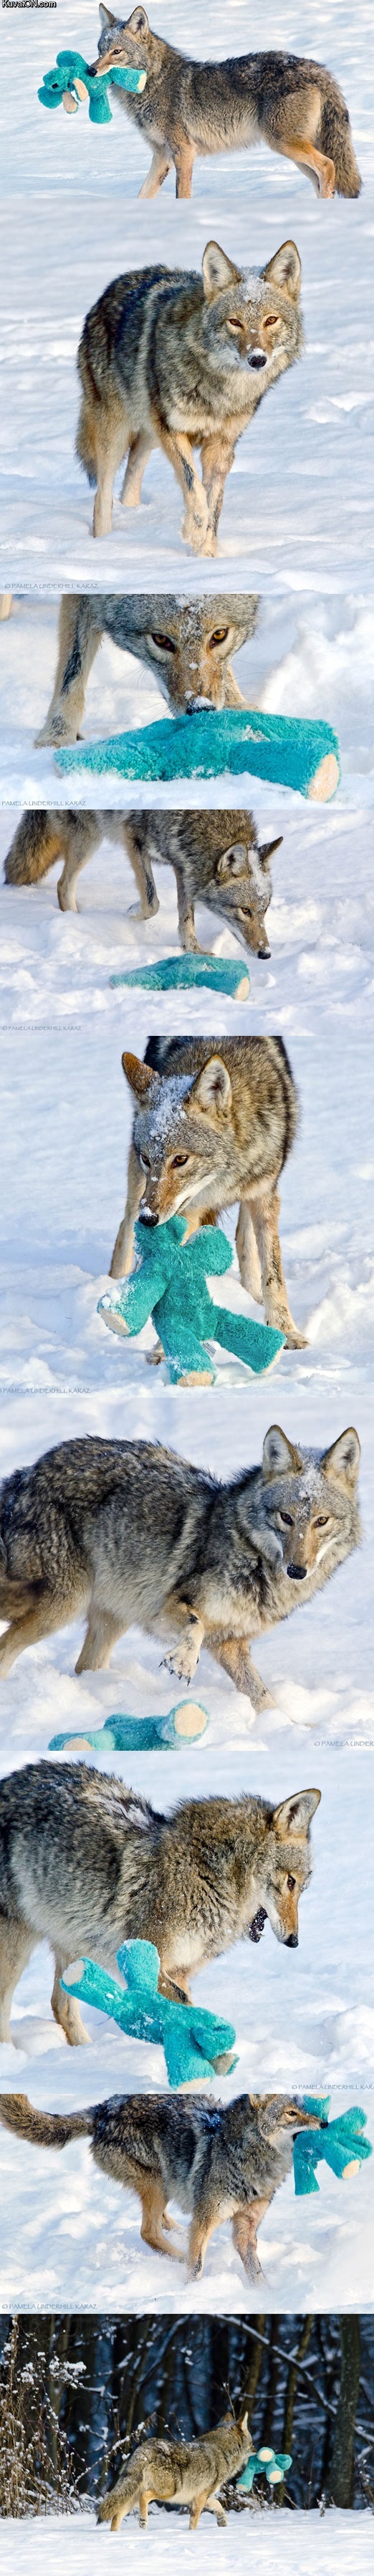 coyote_finds_old_dog_toy_acts_like_a_puppy.jpg